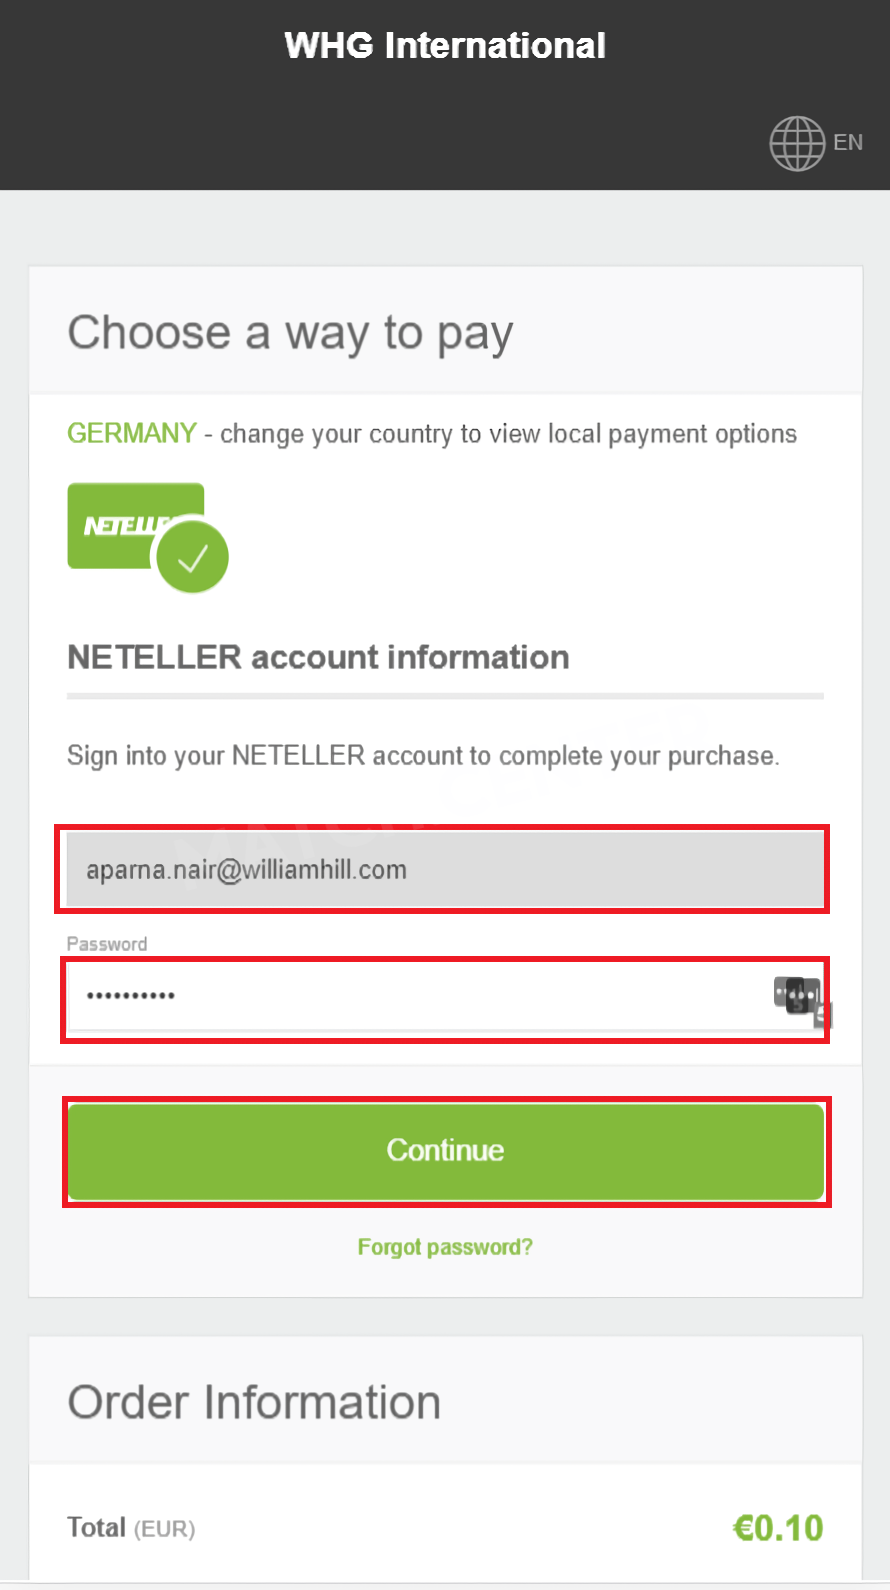 Logging into a Neteller account